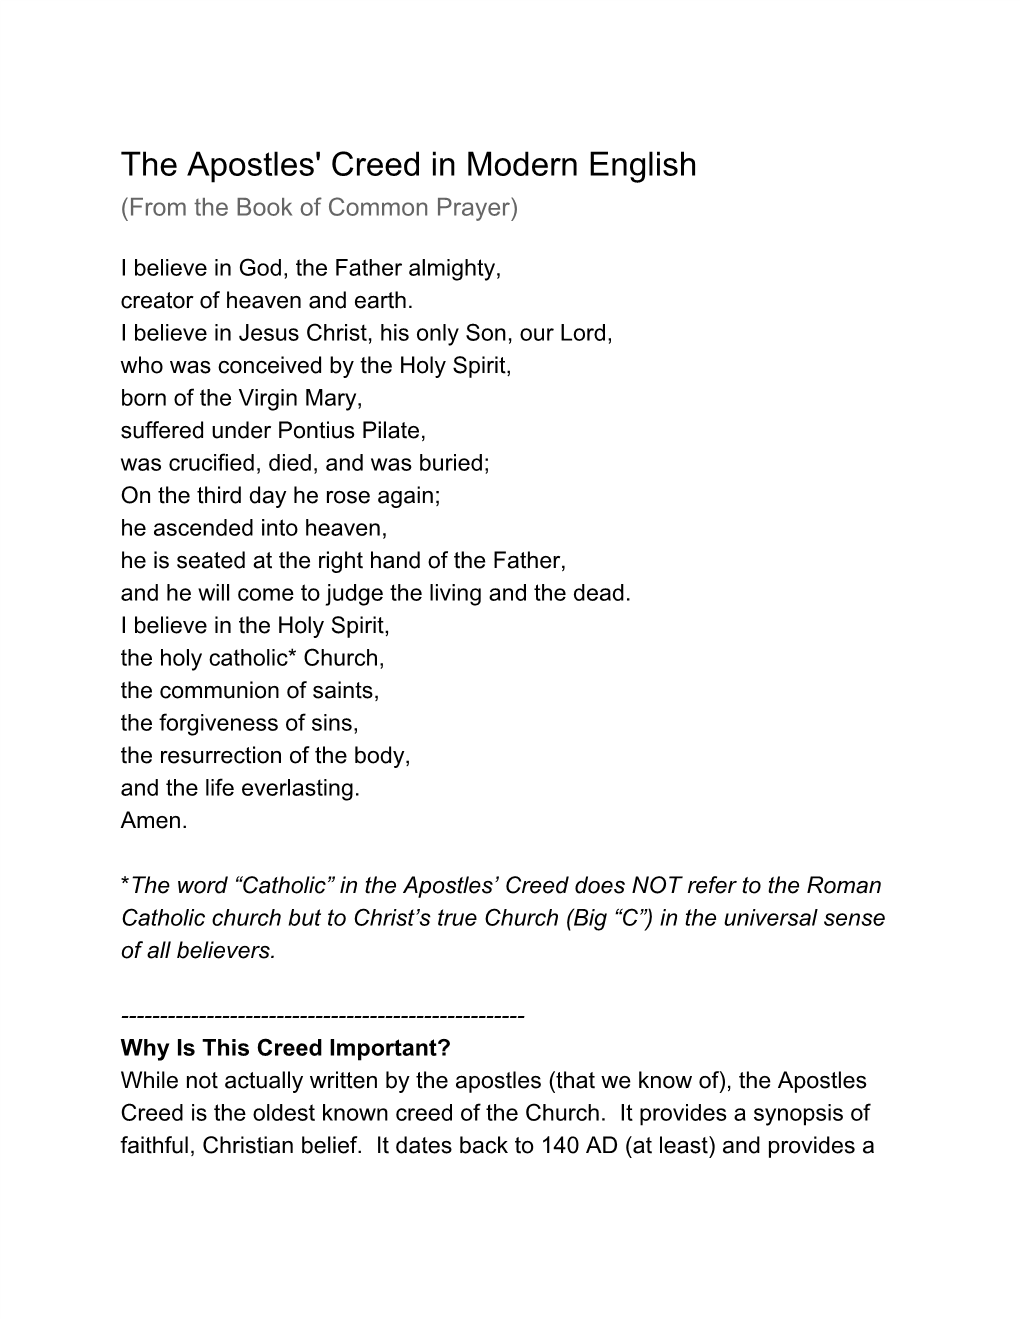 The Apostles' Creed in Modern English (From the Book of Common Prayer)